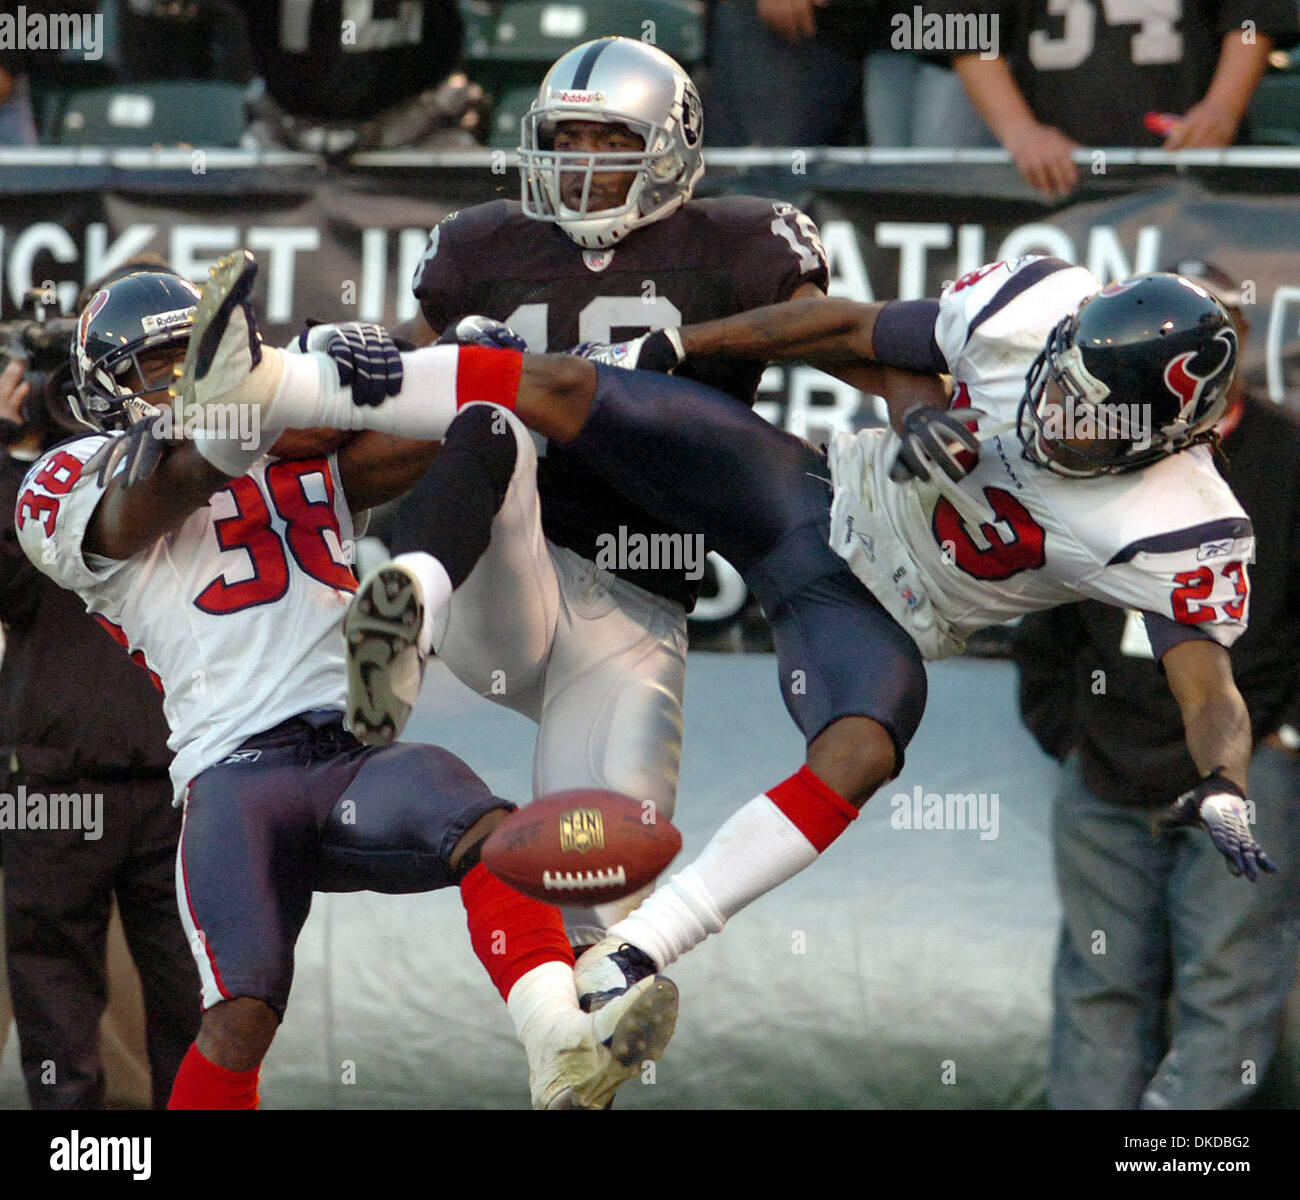 Dec 03, 2006; Oakland, CA, USA; Oakland Raiders wide receiver RANDY MOSS can't catch a pass in the endzone sandwiched by Houston Texans cornerbacks DEMARCUS FAGGINS (38) and DUNTA ROBINSON (23) with less than a minute to go in the fourth quarter in game played at the McAfee Coliseum. The Texans beat the Raiders 23-14. Mandatory Credit: Photo by Eddie Ledesma/Contra Costa Times/ZUMA Stock Photo